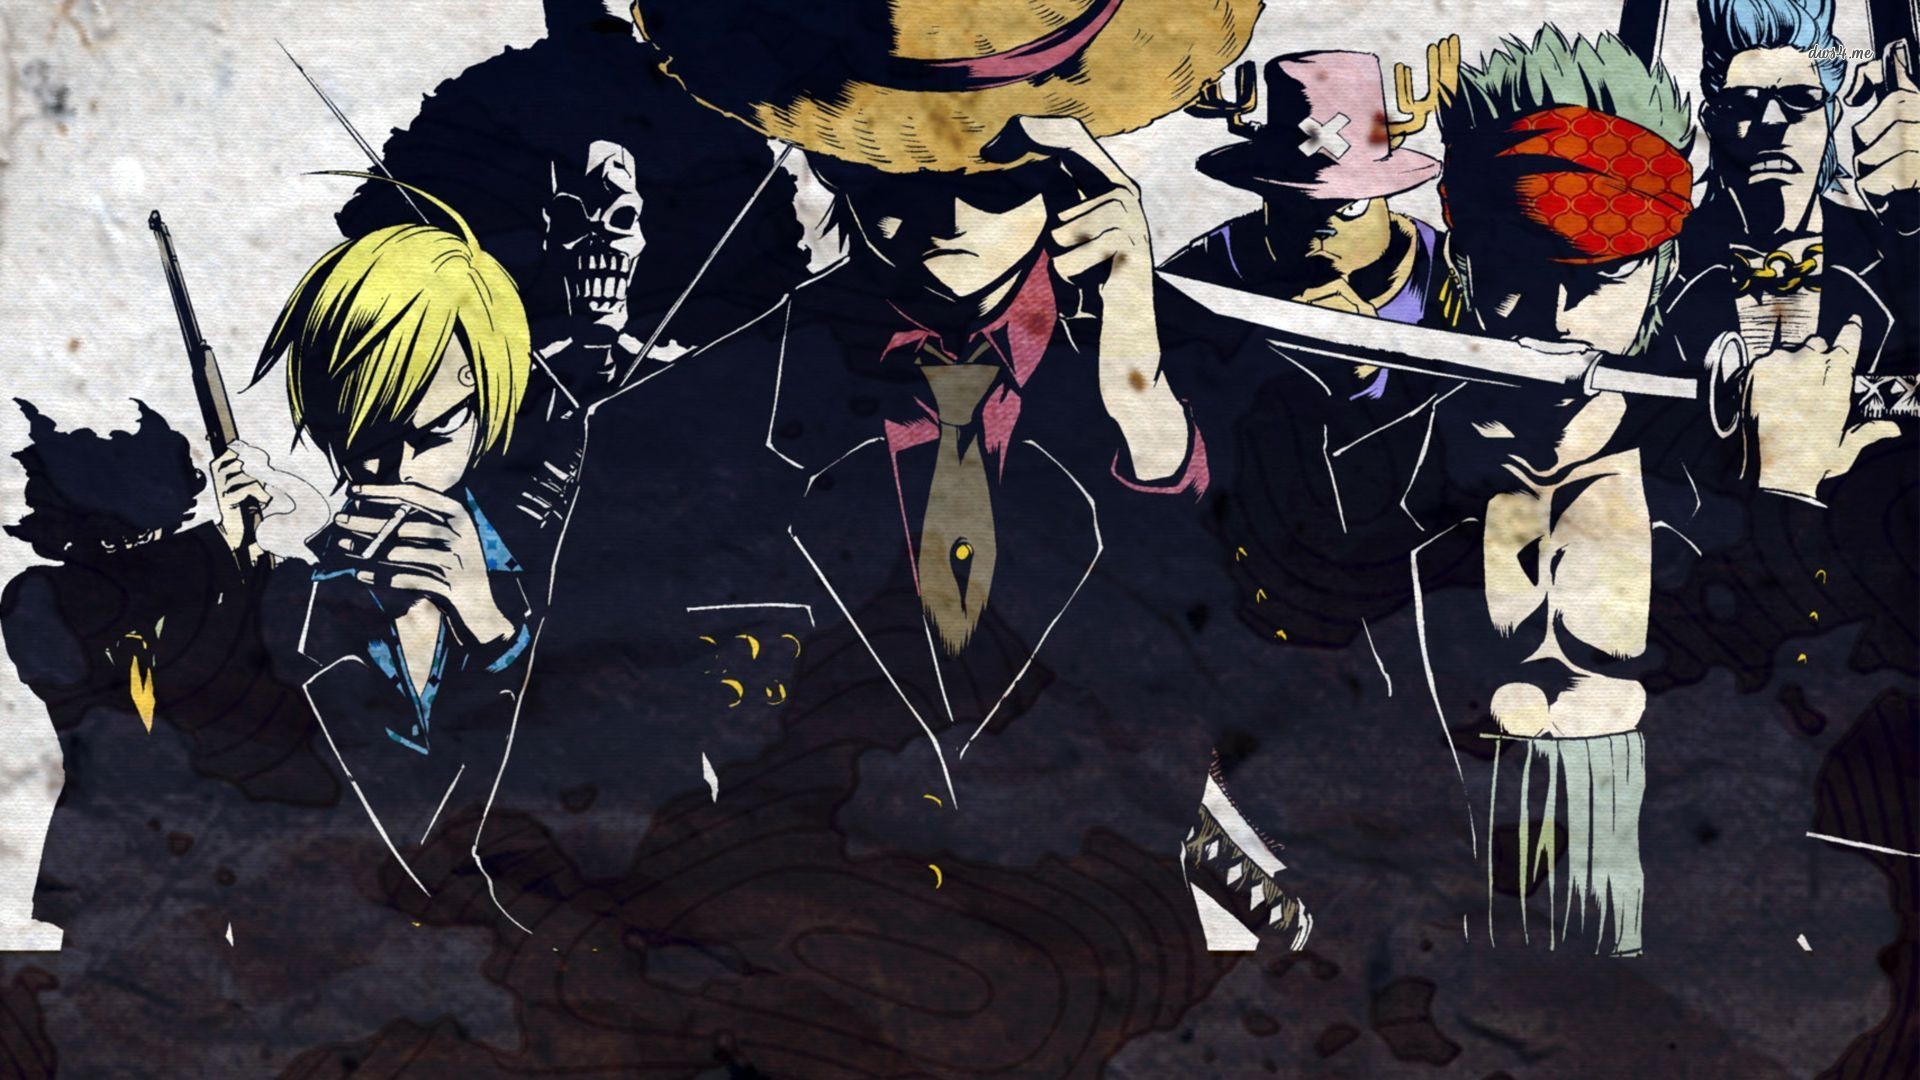 Wallpaper / One Piece, anime, anime boys, tie, hat free download